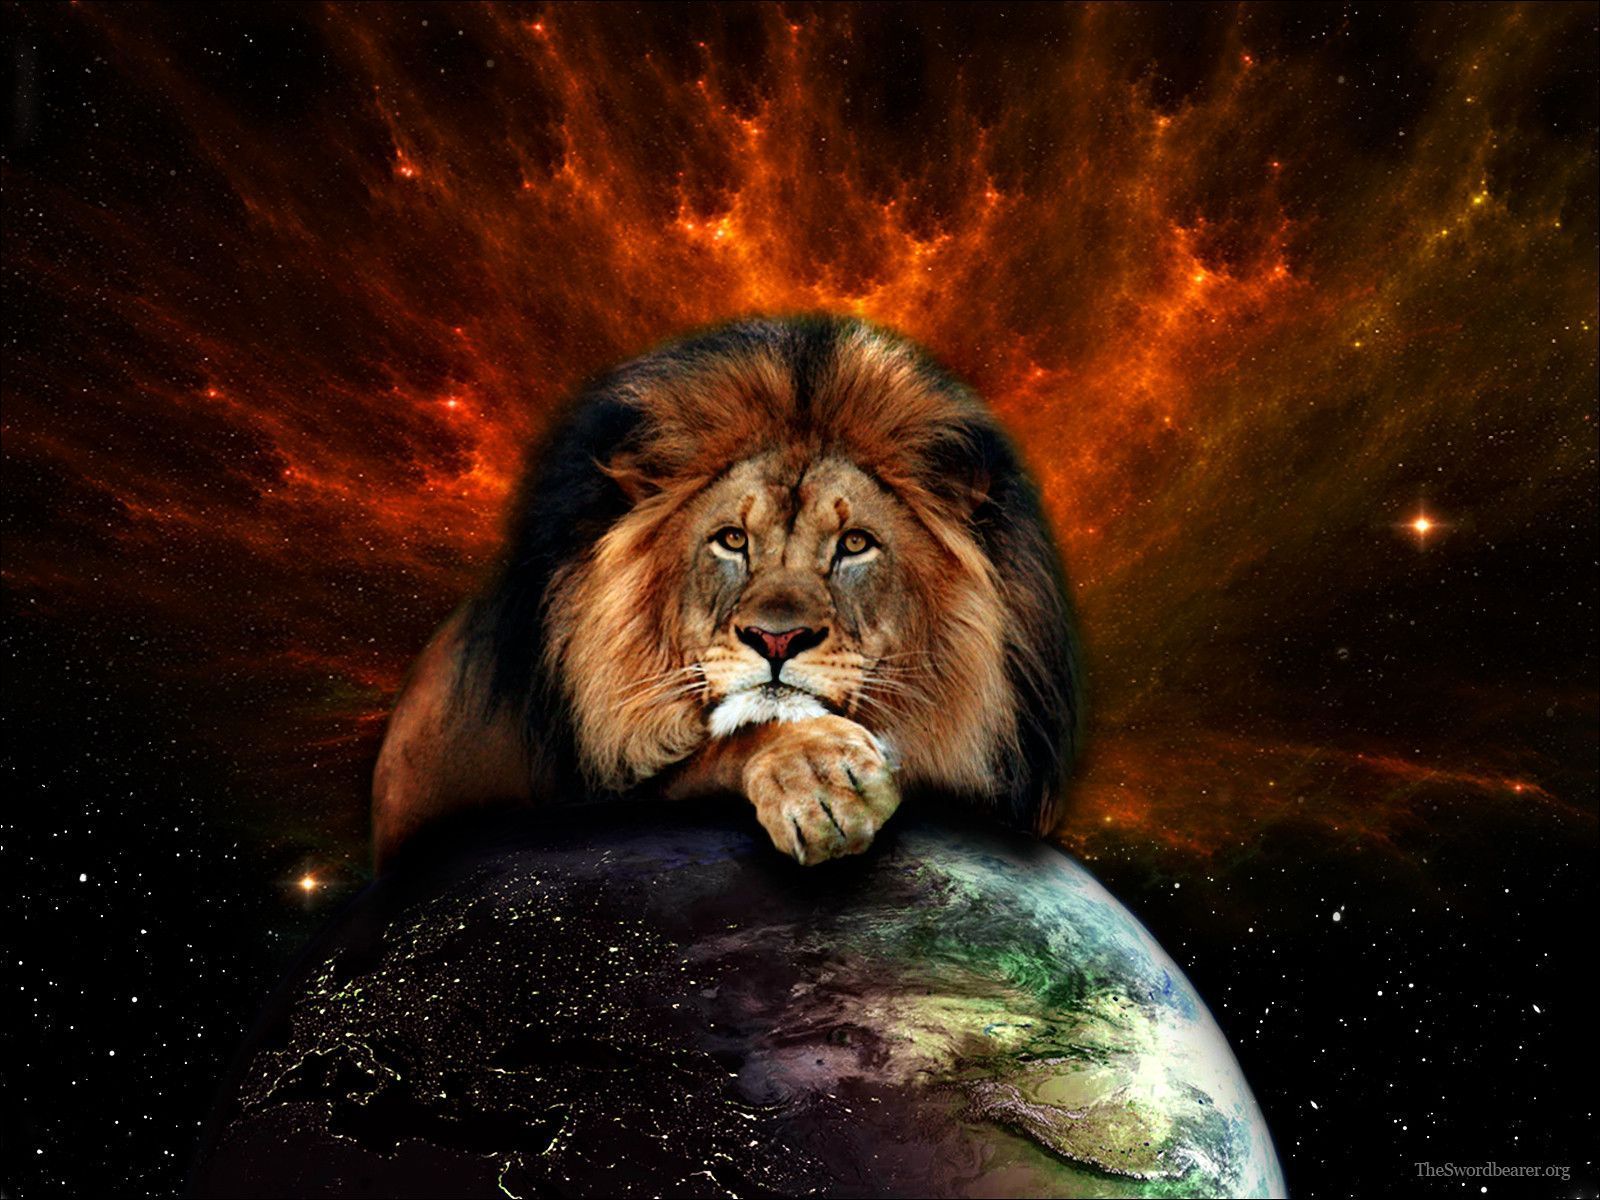 Wallpaper: Lion of the tribe of Judah. Please also visit